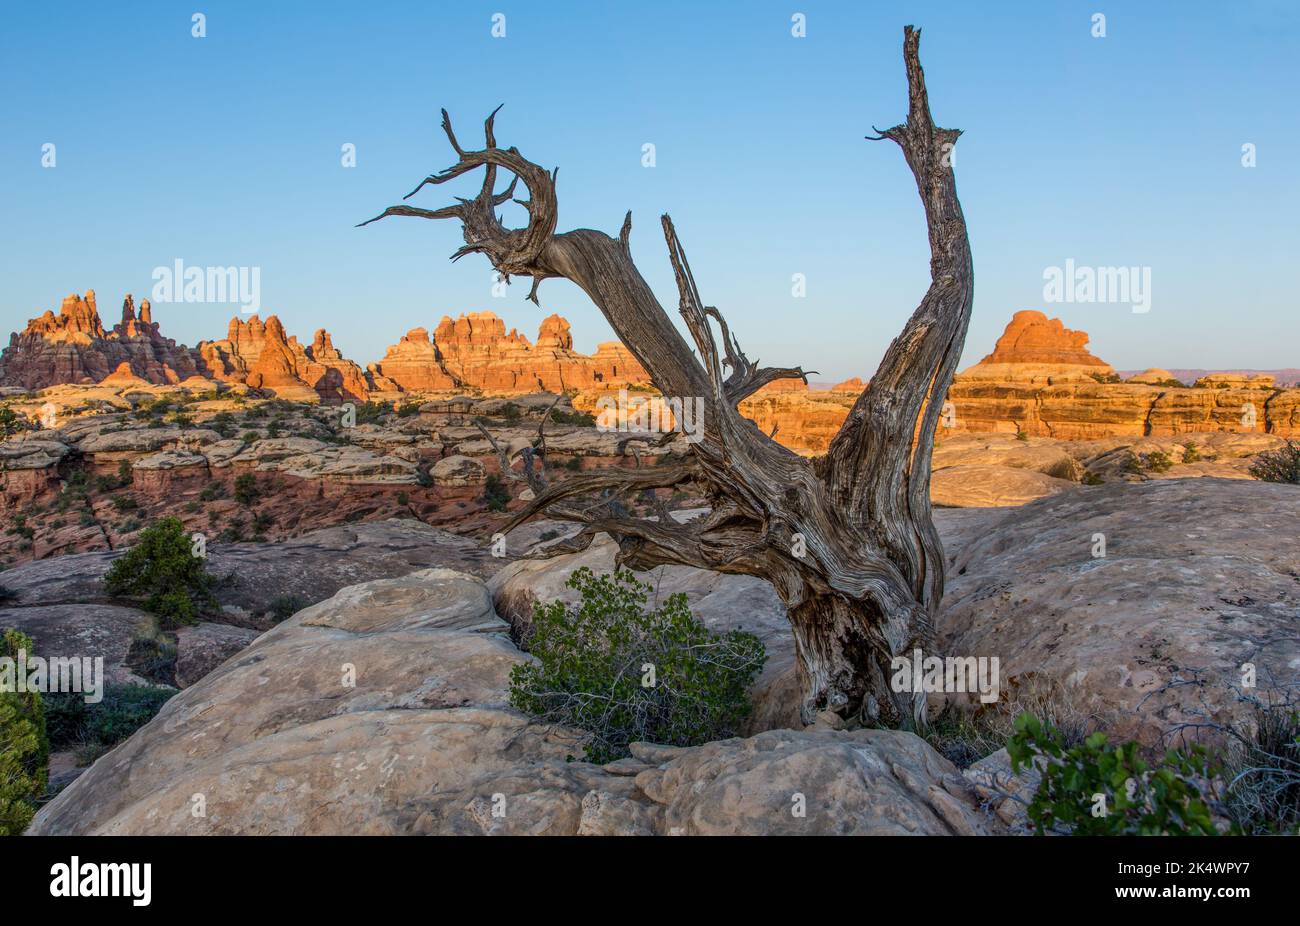 A dead juniper tree on a sandstone rock formation in the Devil's Kitchen area, Needles District, Canyonlands NP, Utah. Stock Photo